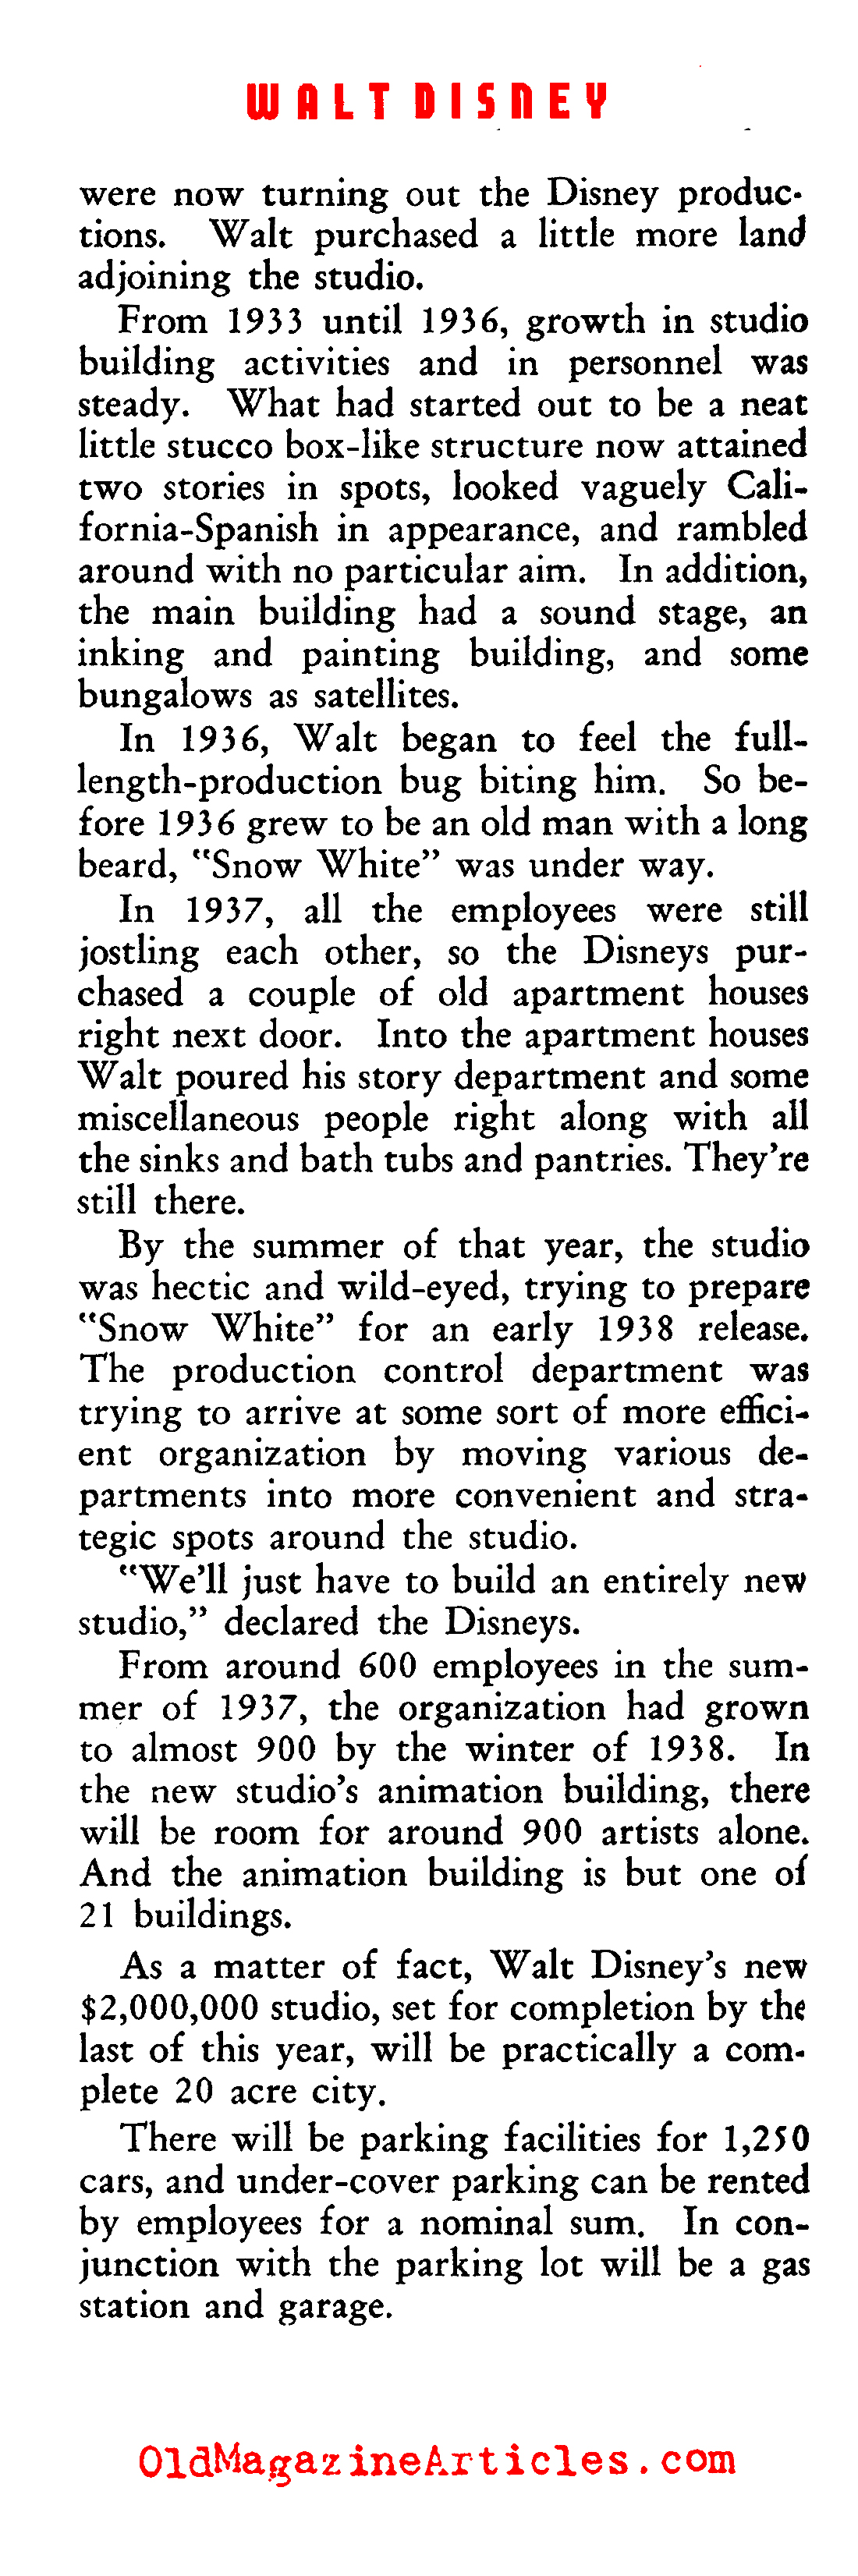 Growth and Expansion at the Walt Disney Company (Film Daily, 1939)